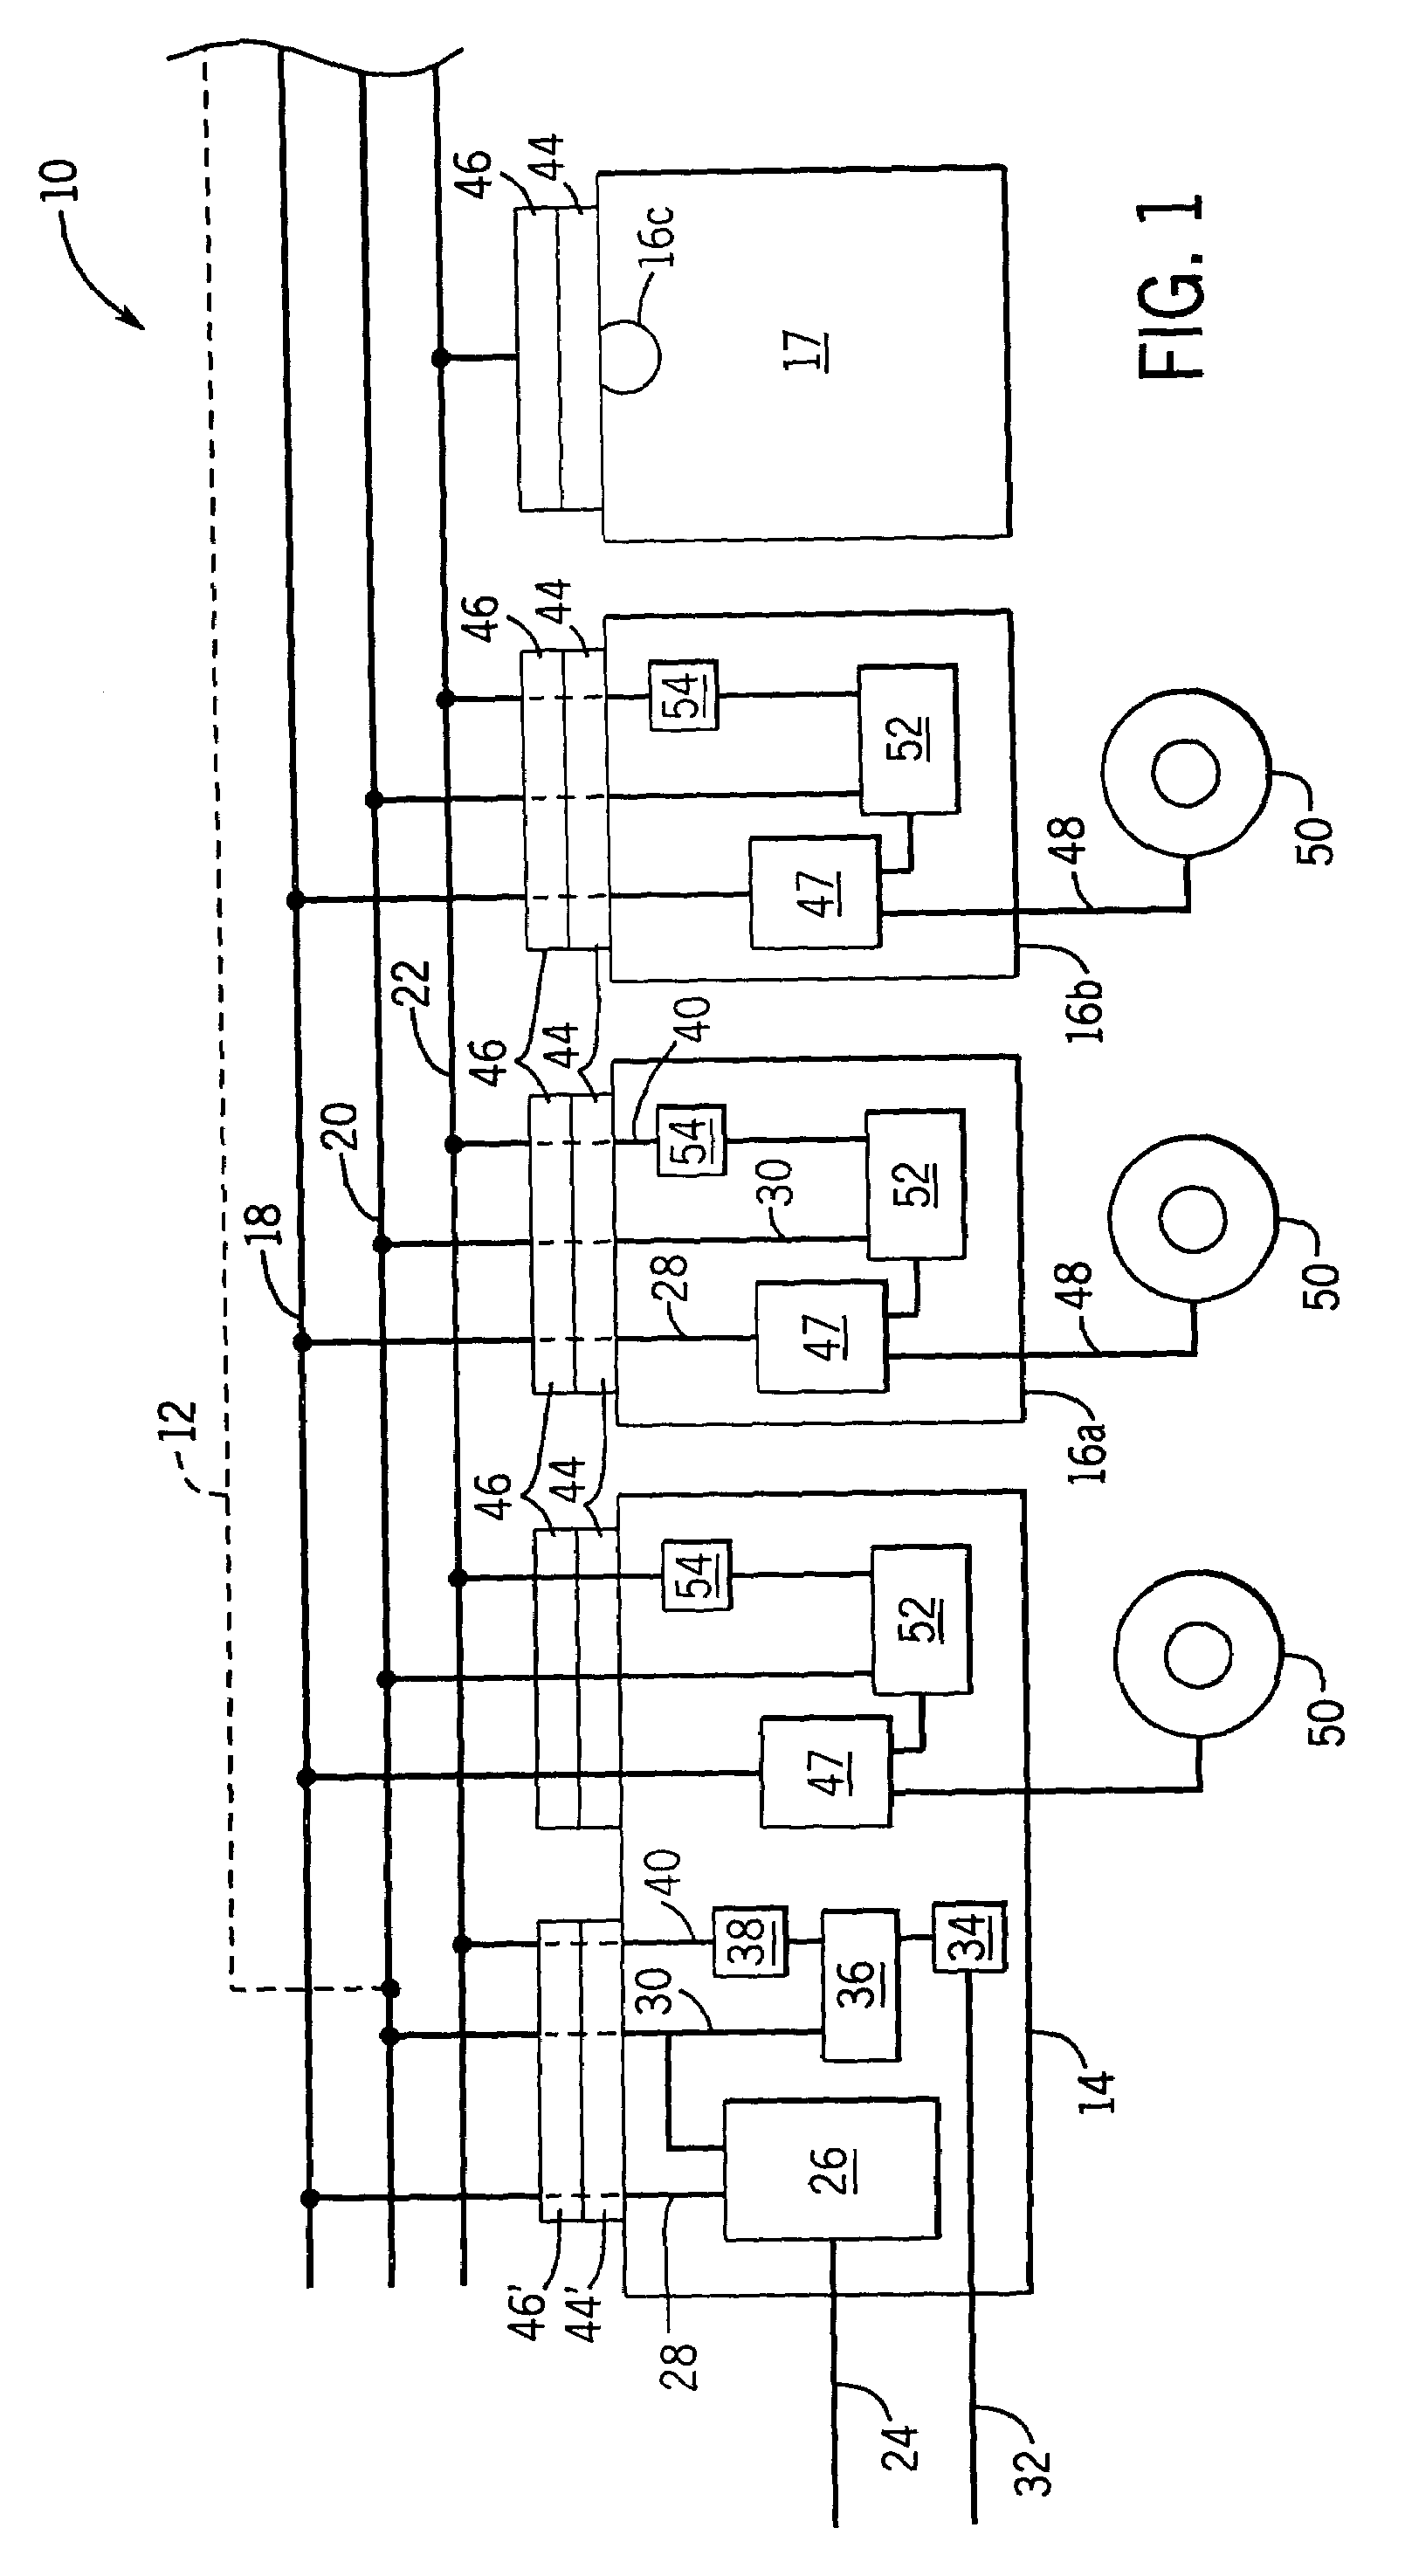 Multi-axis motor control with high voltage backplane